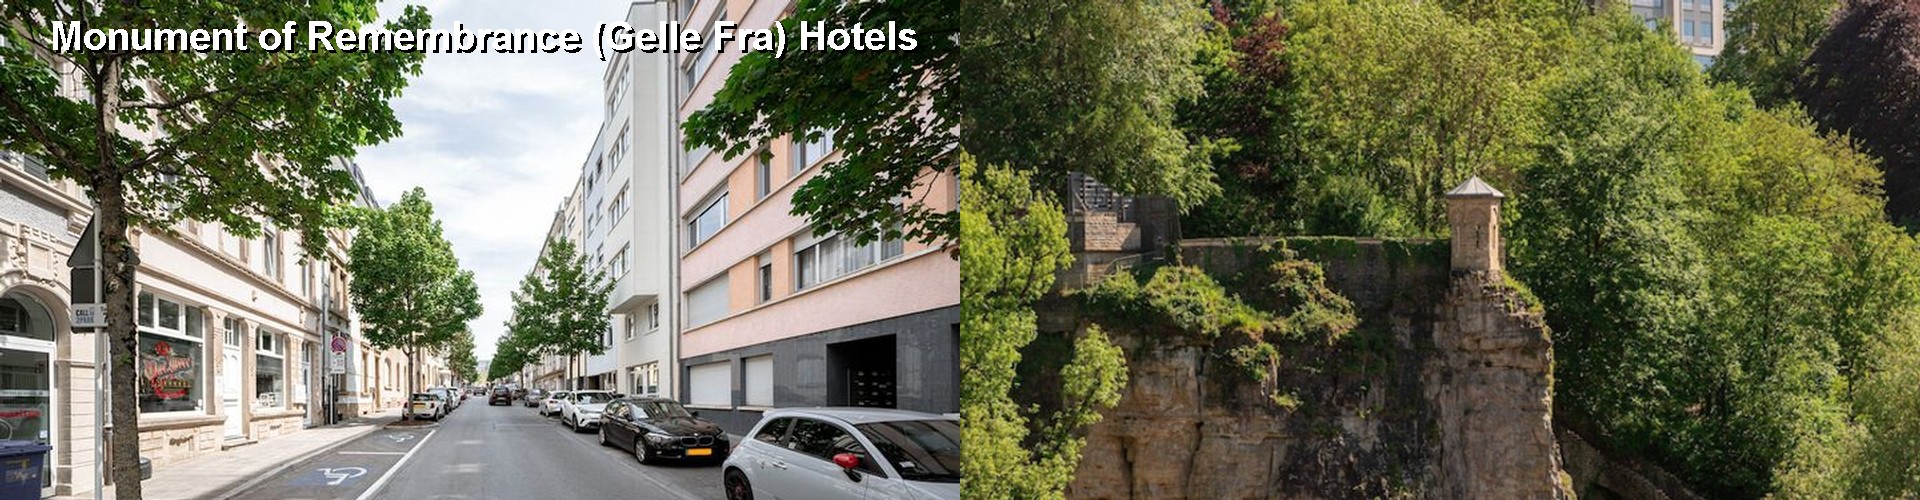 5 Best Hotels near Monument of Remembrance (Gelle Fra)